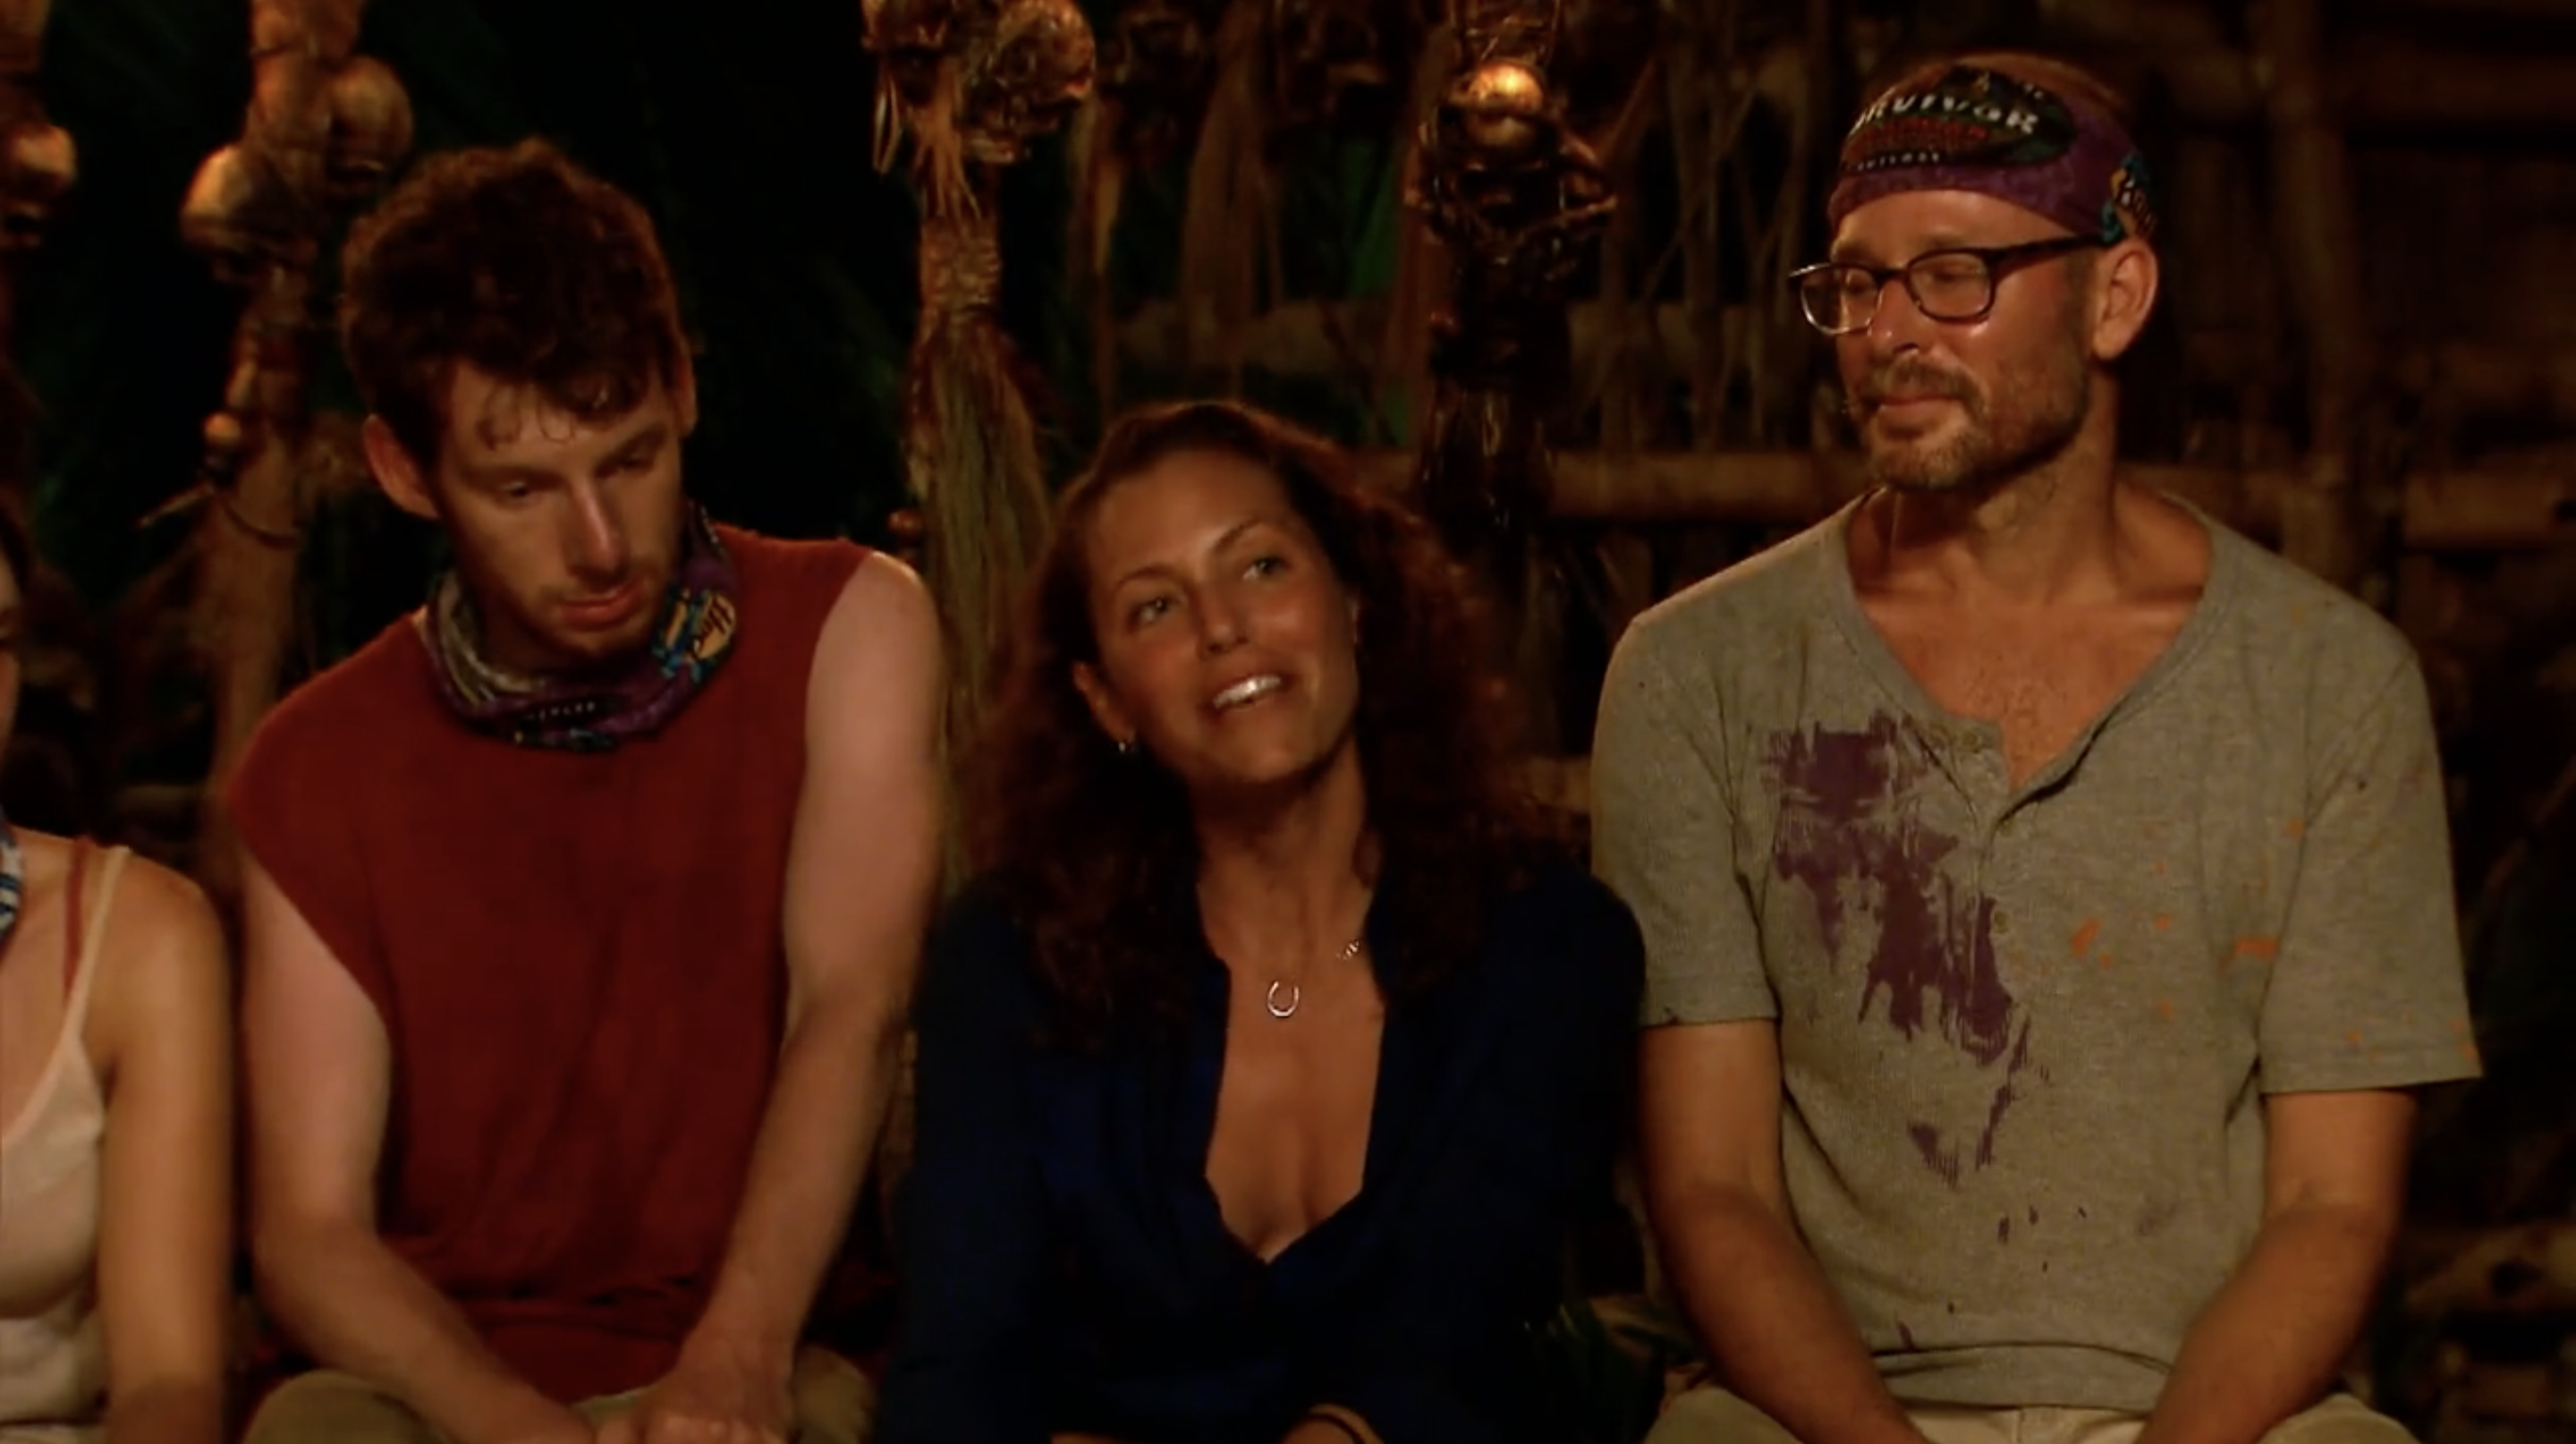 Corinne Kaplan and Michael Snow at Tribal Council